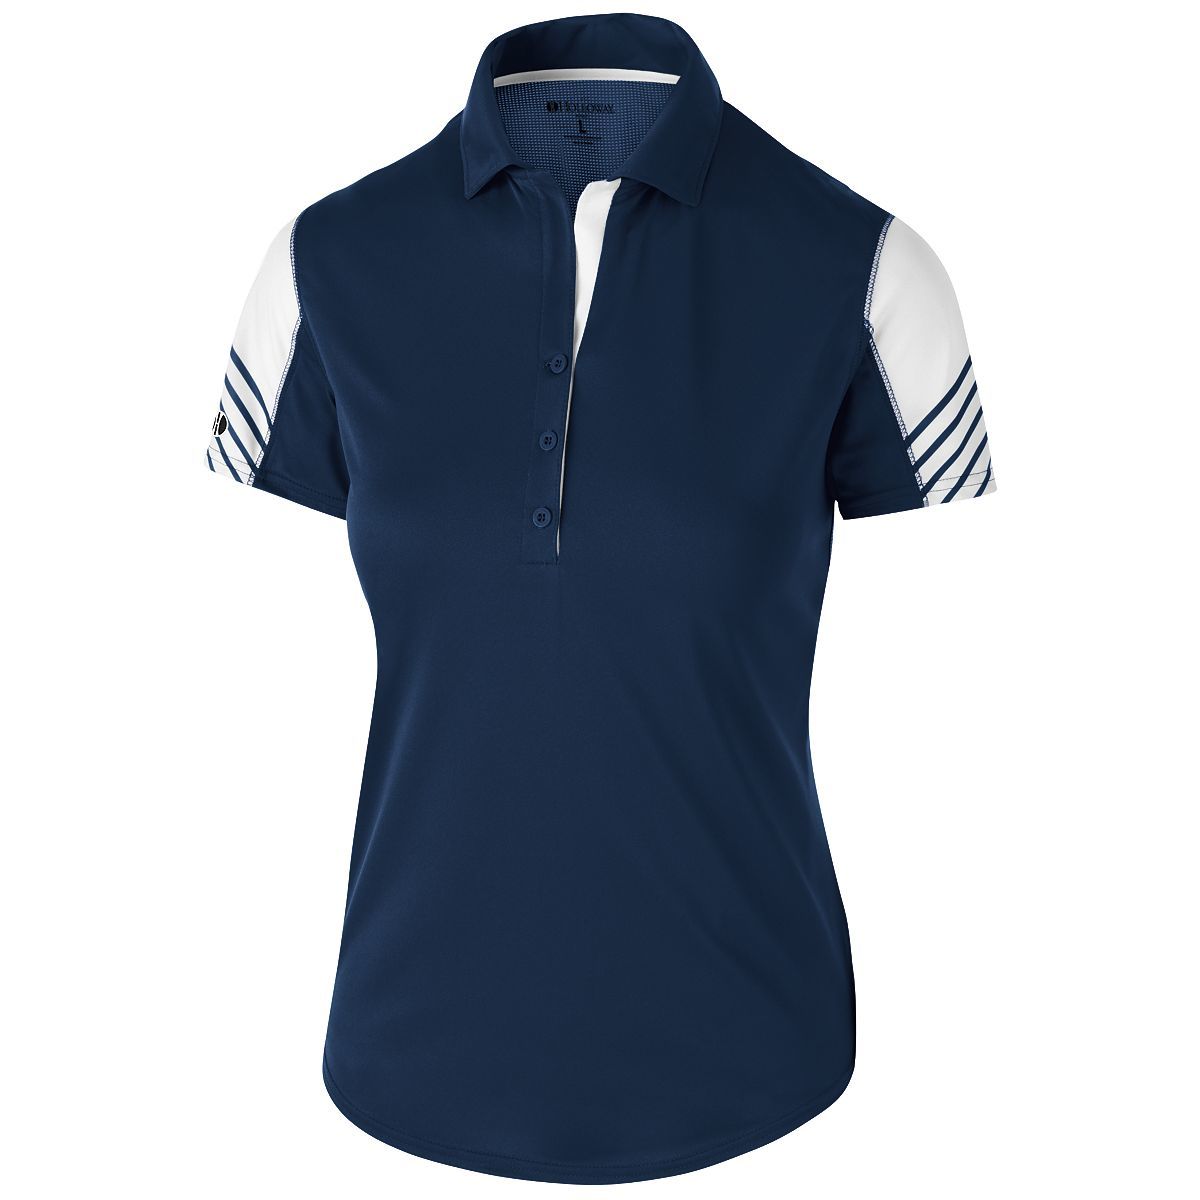 Holloway Ladies Arc Polo in Navy/White  -Part of the Ladies, Ladies-Polo, Polos, Holloway, Shirts product lines at KanaleyCreations.com